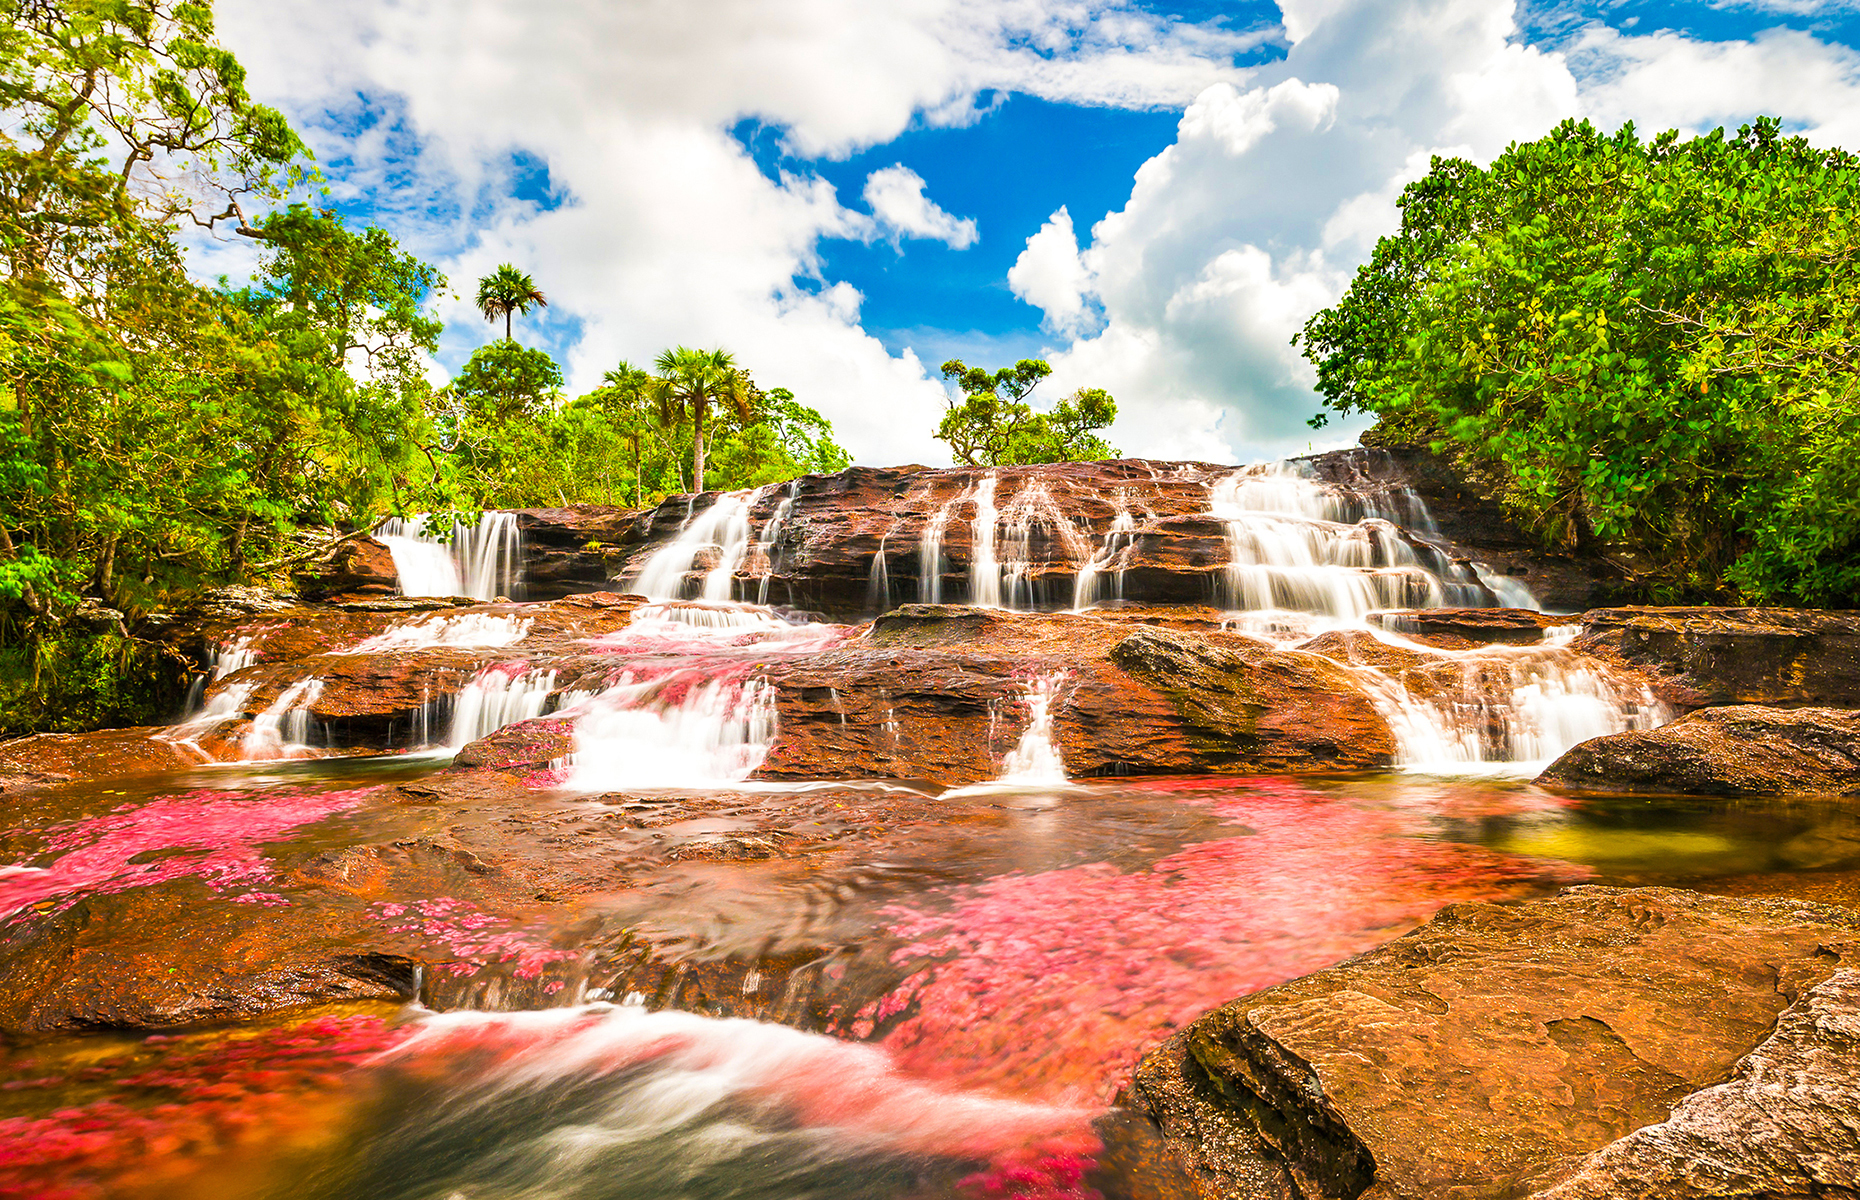 Dreaming of escaping the cold with a tropical vacation, but want to stray off the beaten path? Colombia, with its lush nature and vibrant culture, could be just the ticket. Here are 20 incredible places to visit in this South American country that are more than worth the trip.